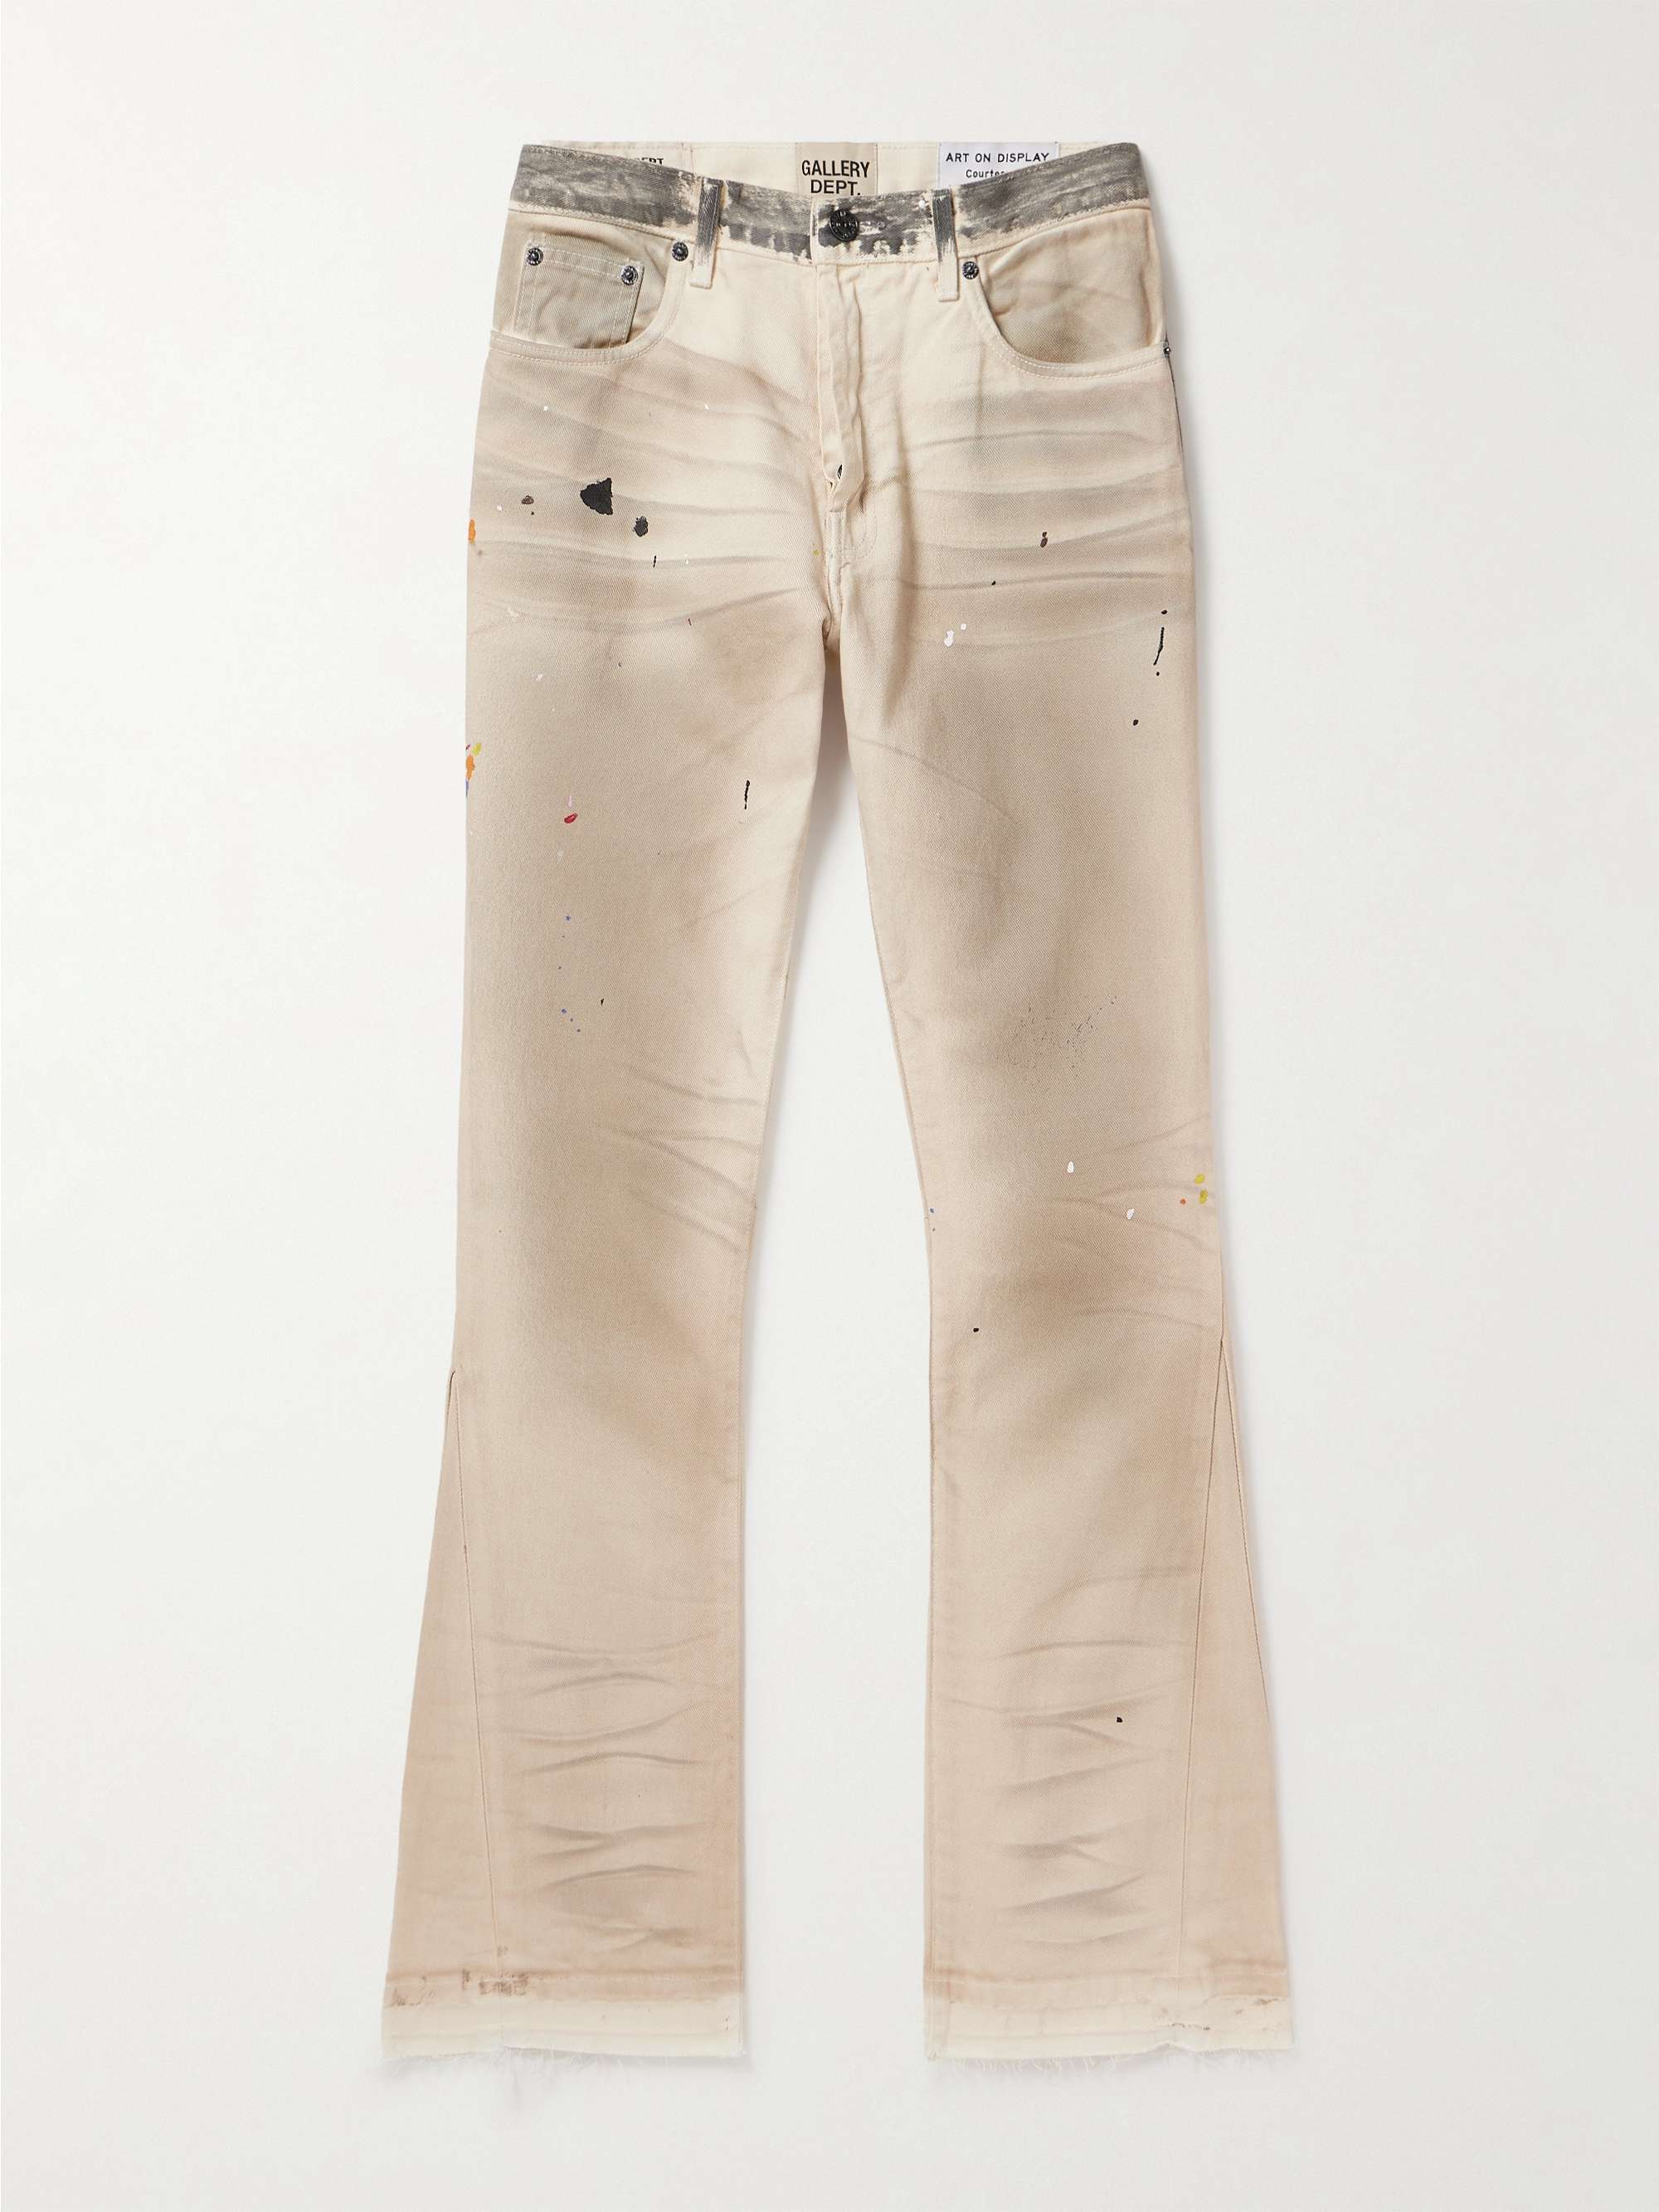 GALLERY DEPT. Hollywood Flared Distressed Paint-Splattered Jeans for ...